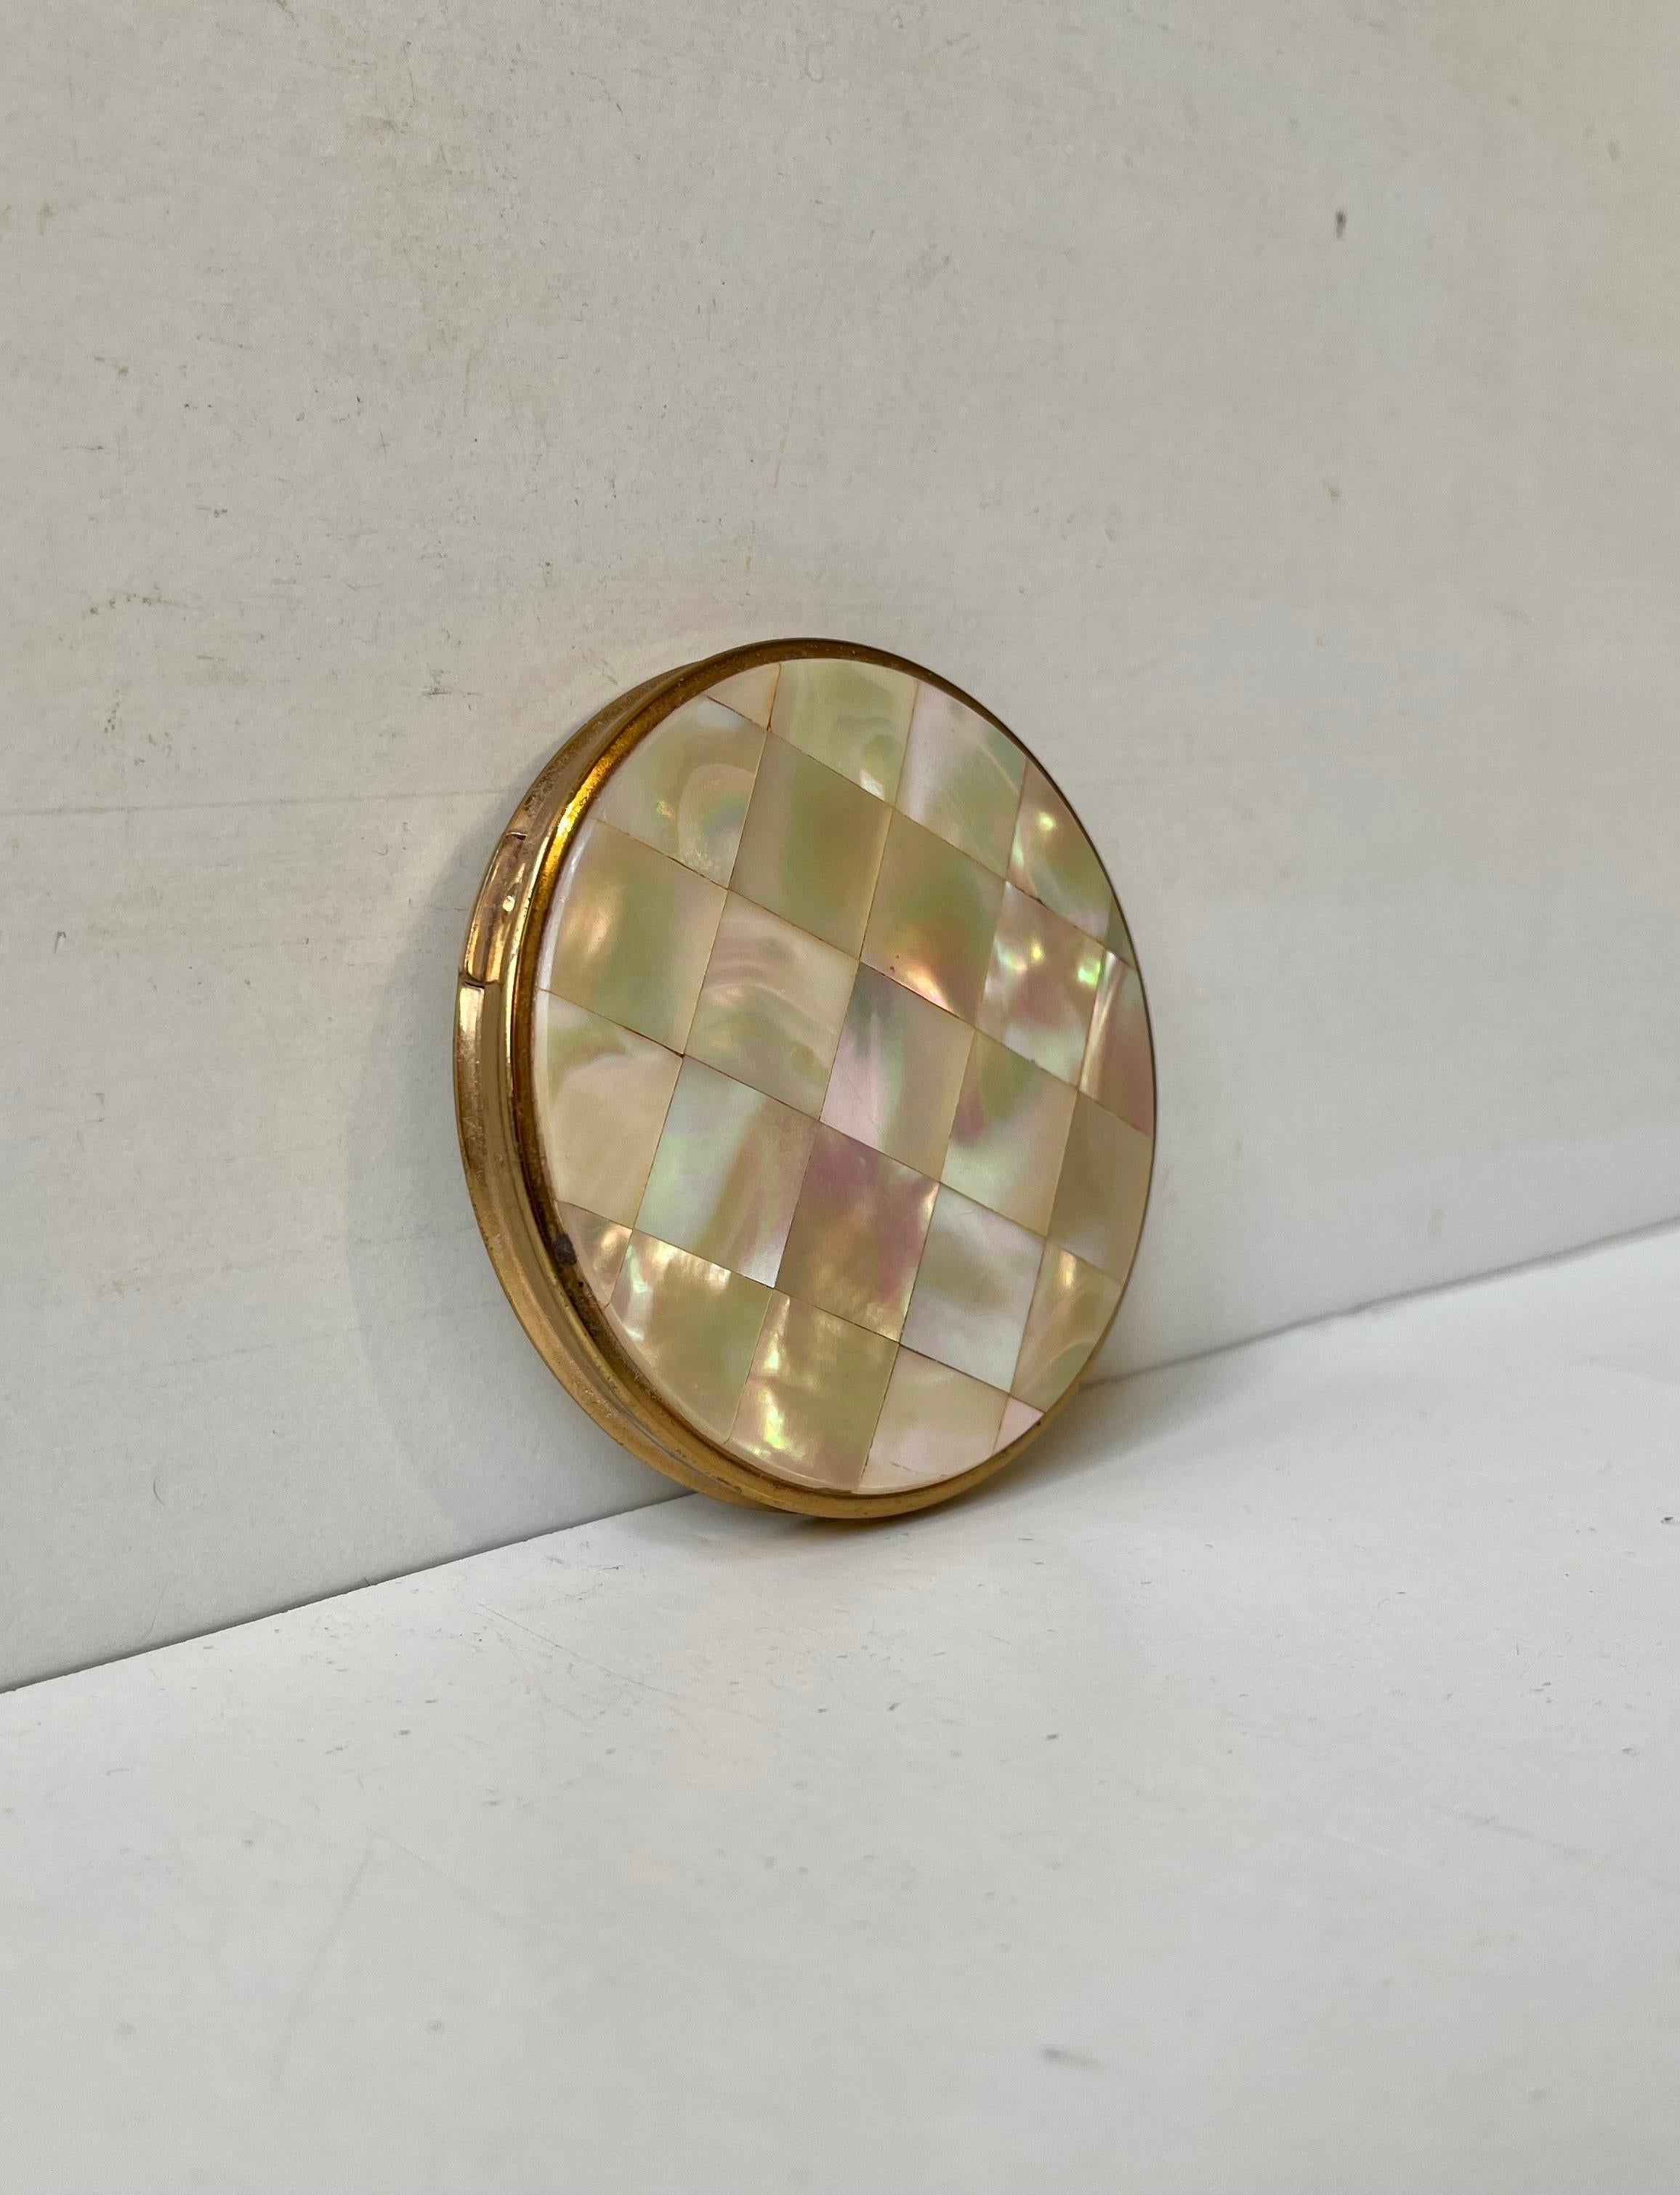 A stylish vintage powder compact with mirror executed in gold plated metal and showcasing a front tiled with mother of pearl. Swiss made circa 1930-60. Measurements: D: 8 cm, H:dept: 1.4 cm.